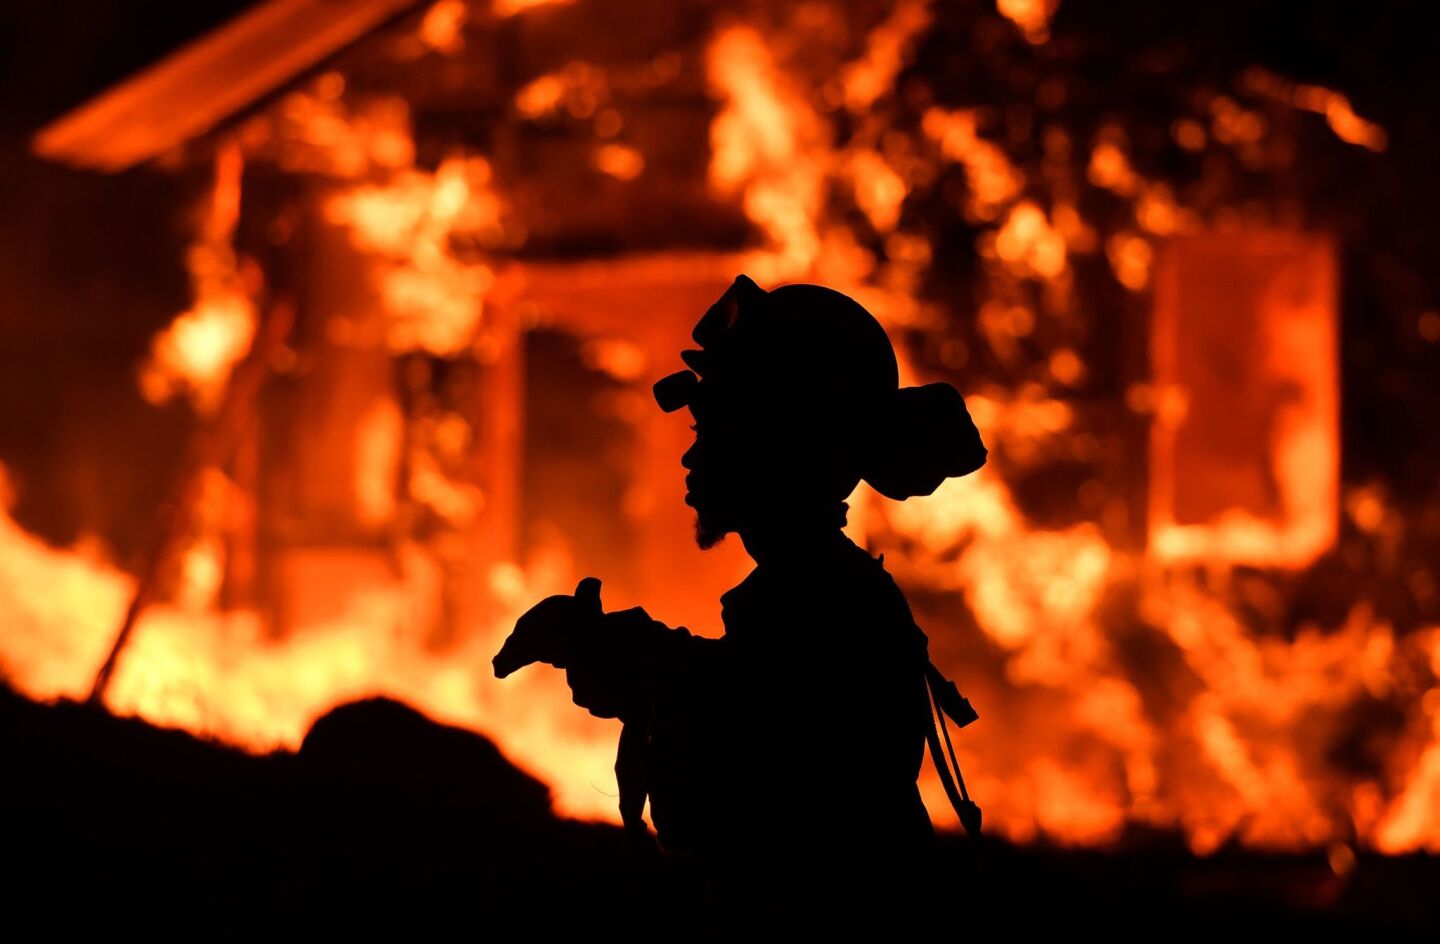 An inmate firefighter monitors flames as a house burns in the Napa wine region.